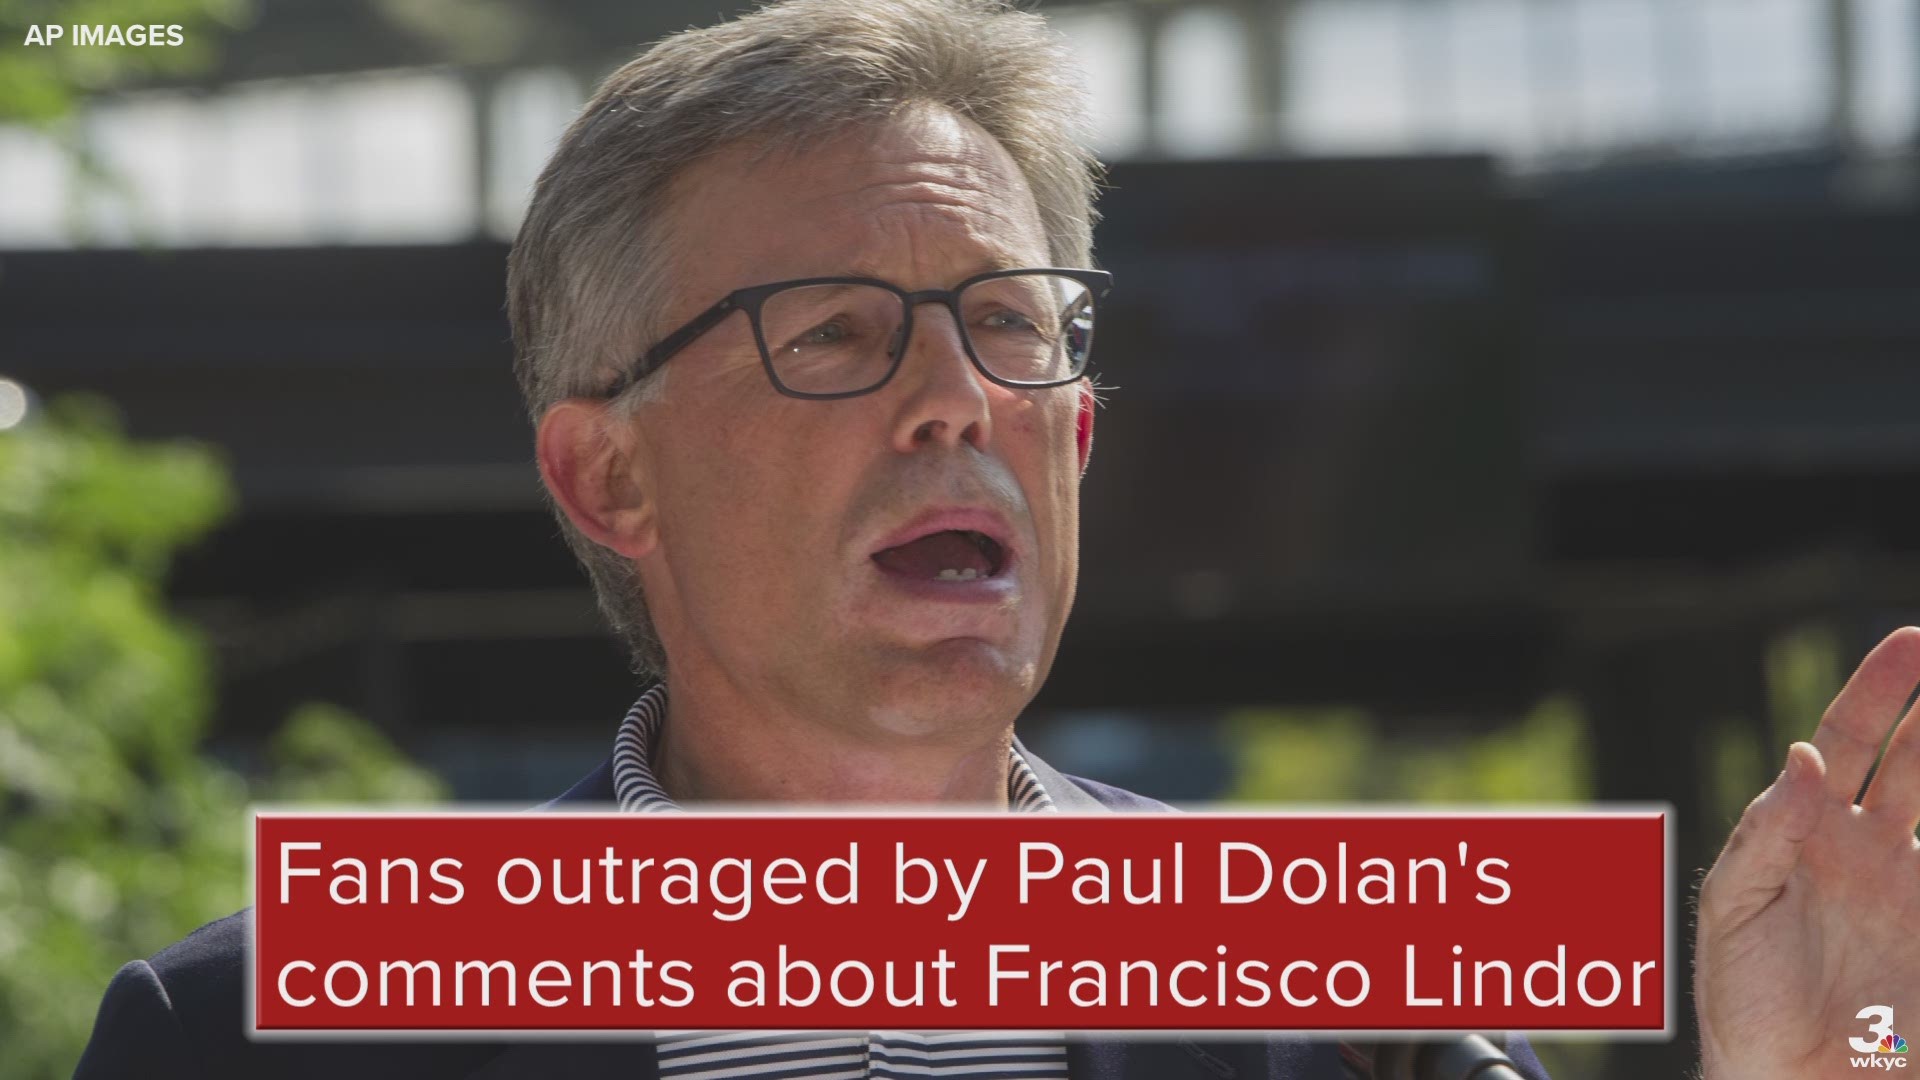 Cleveland Indians fans are not happy with owner Paul Dolan after he said “enjoy him” in reference to a contract extension for shortstop Francisco Lindor.